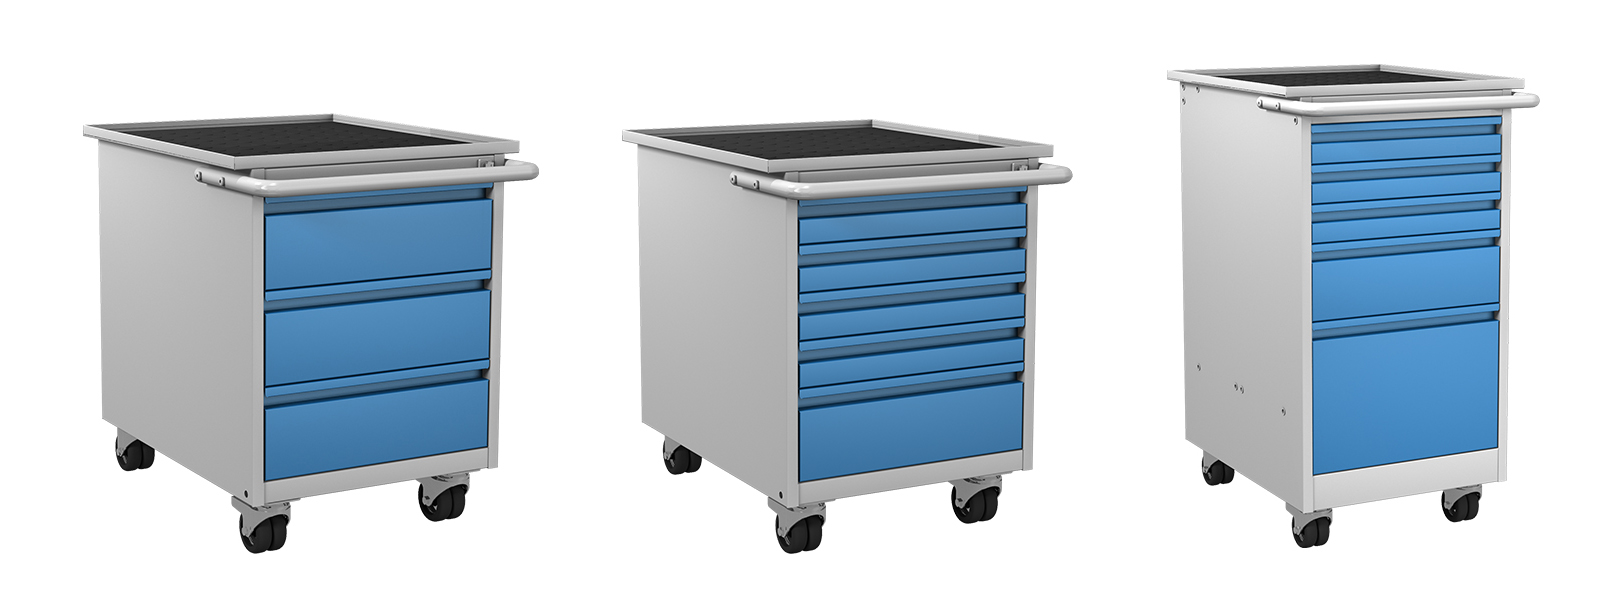 Service trolley with drawers